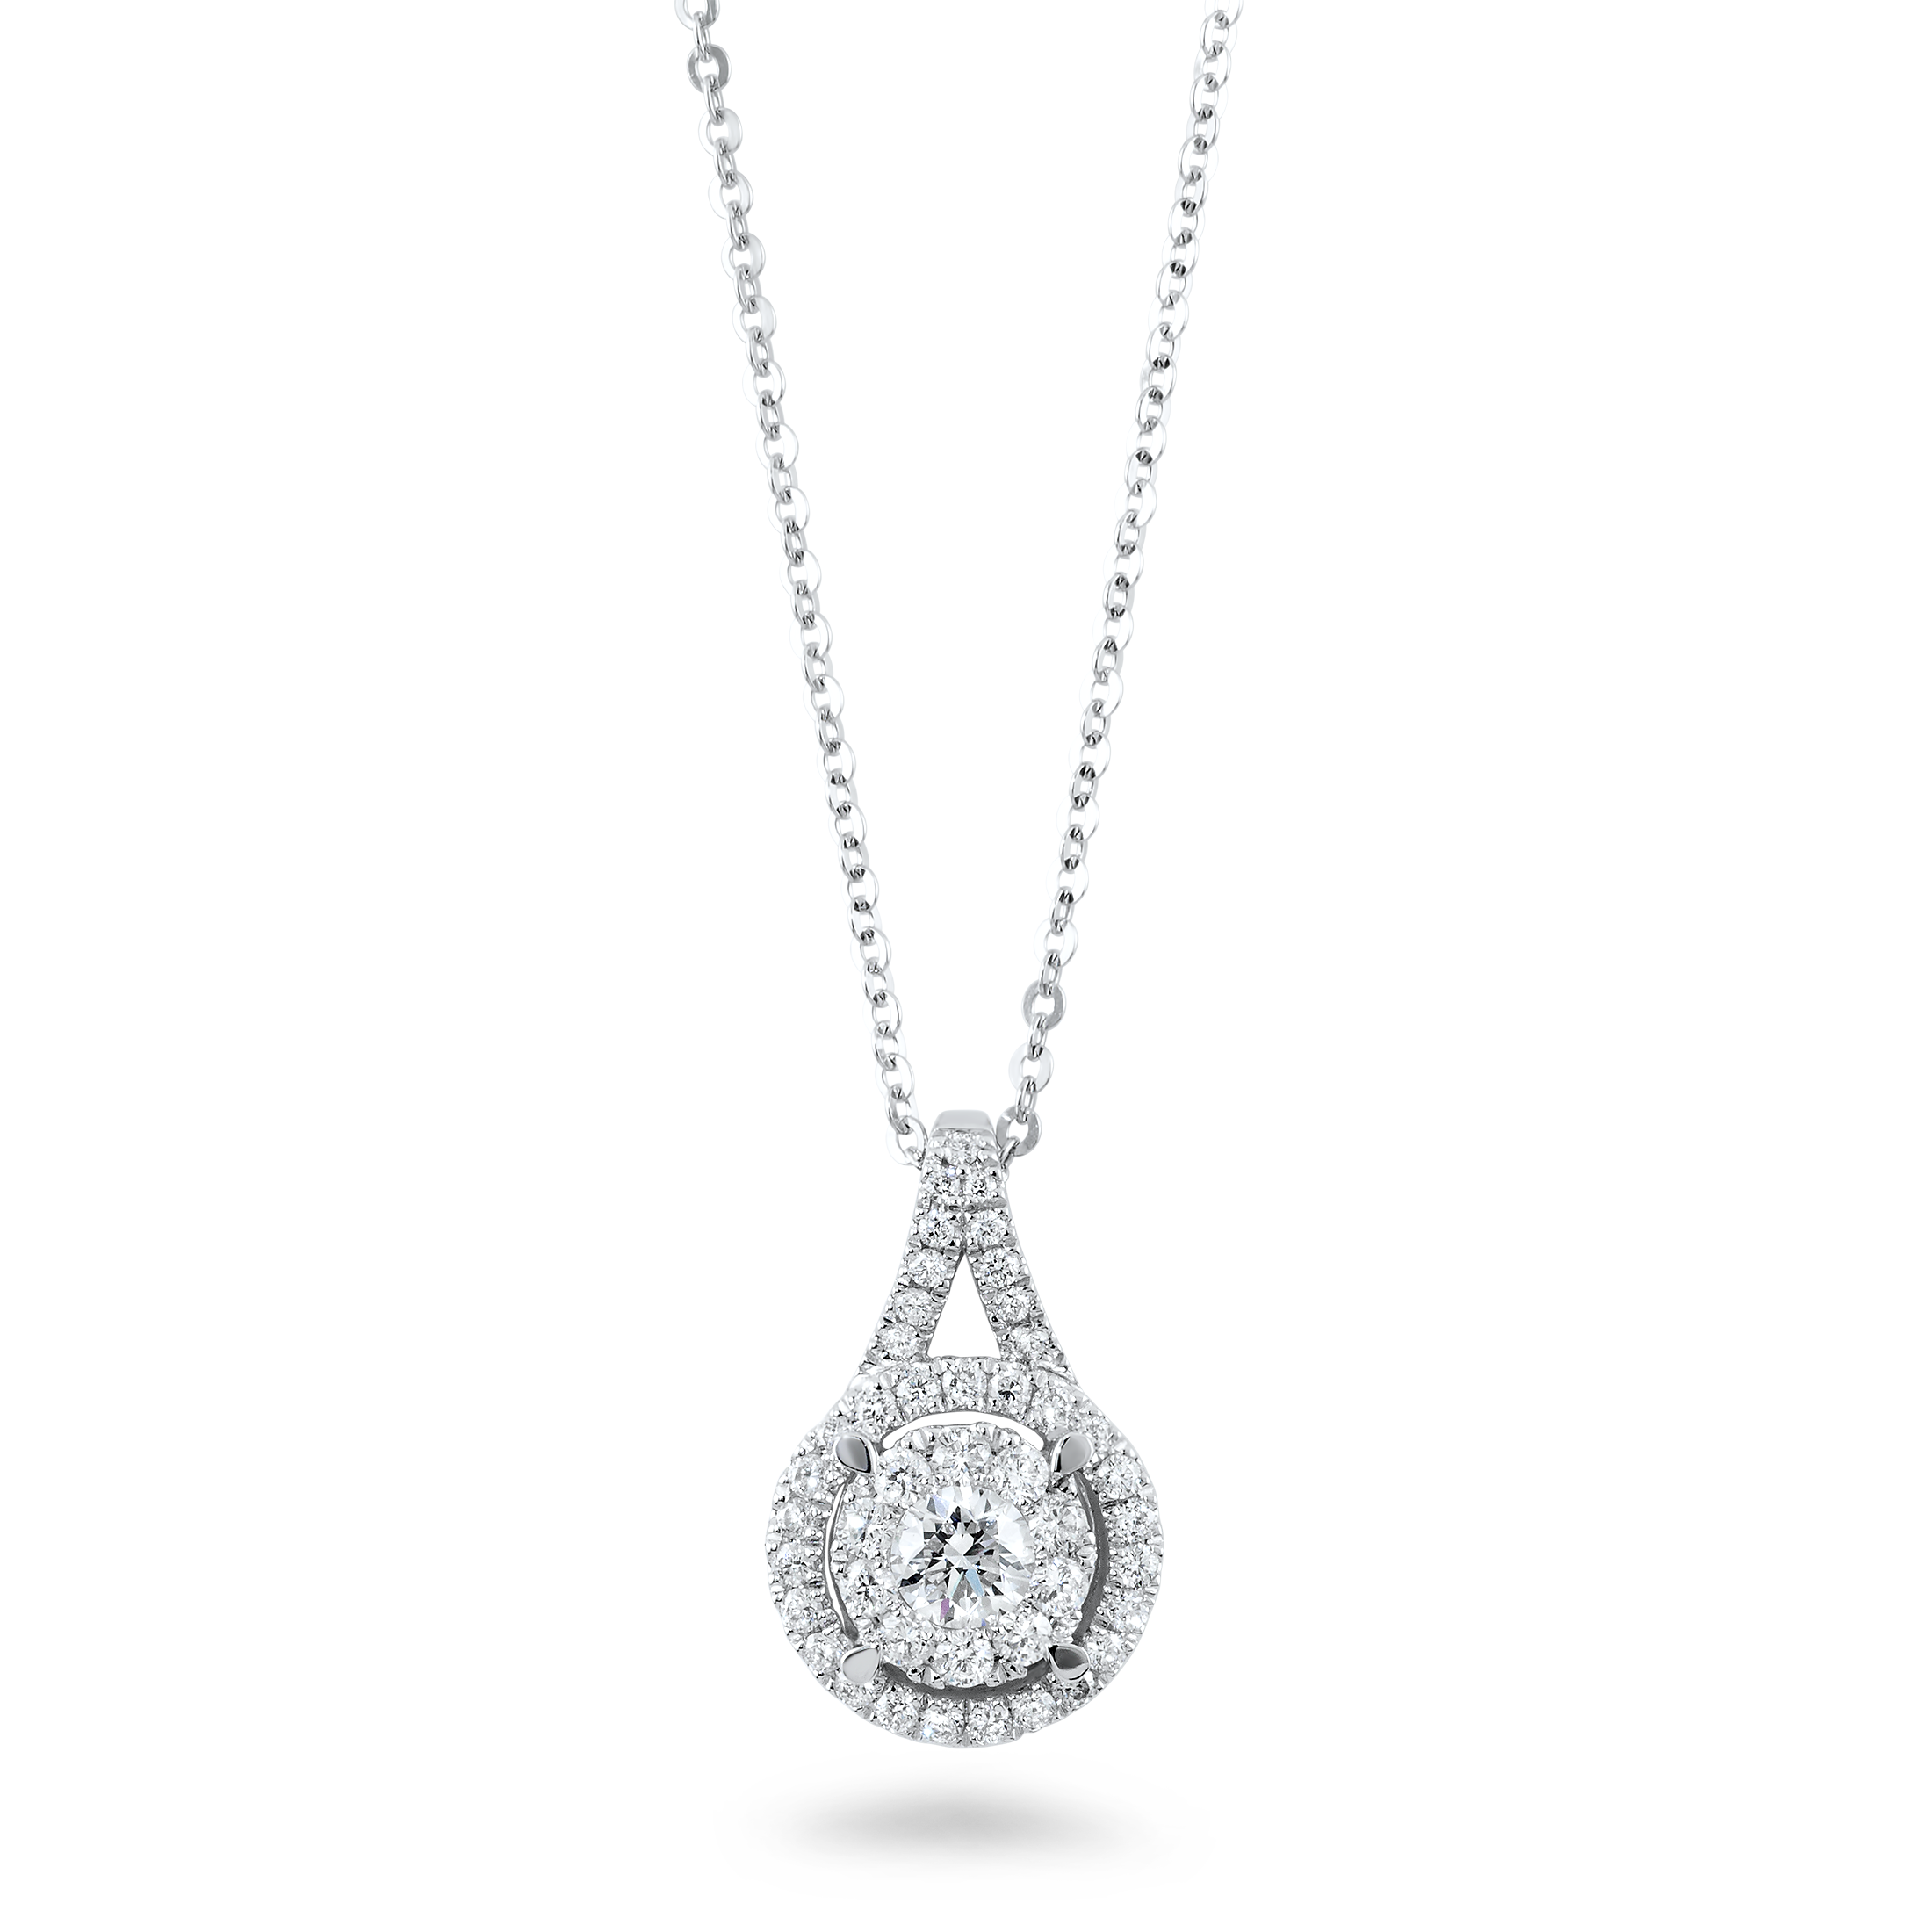 Diamond Necklace Png - Truly Beautiful Diamond Necklace, Transparent background PNG HD thumbnail